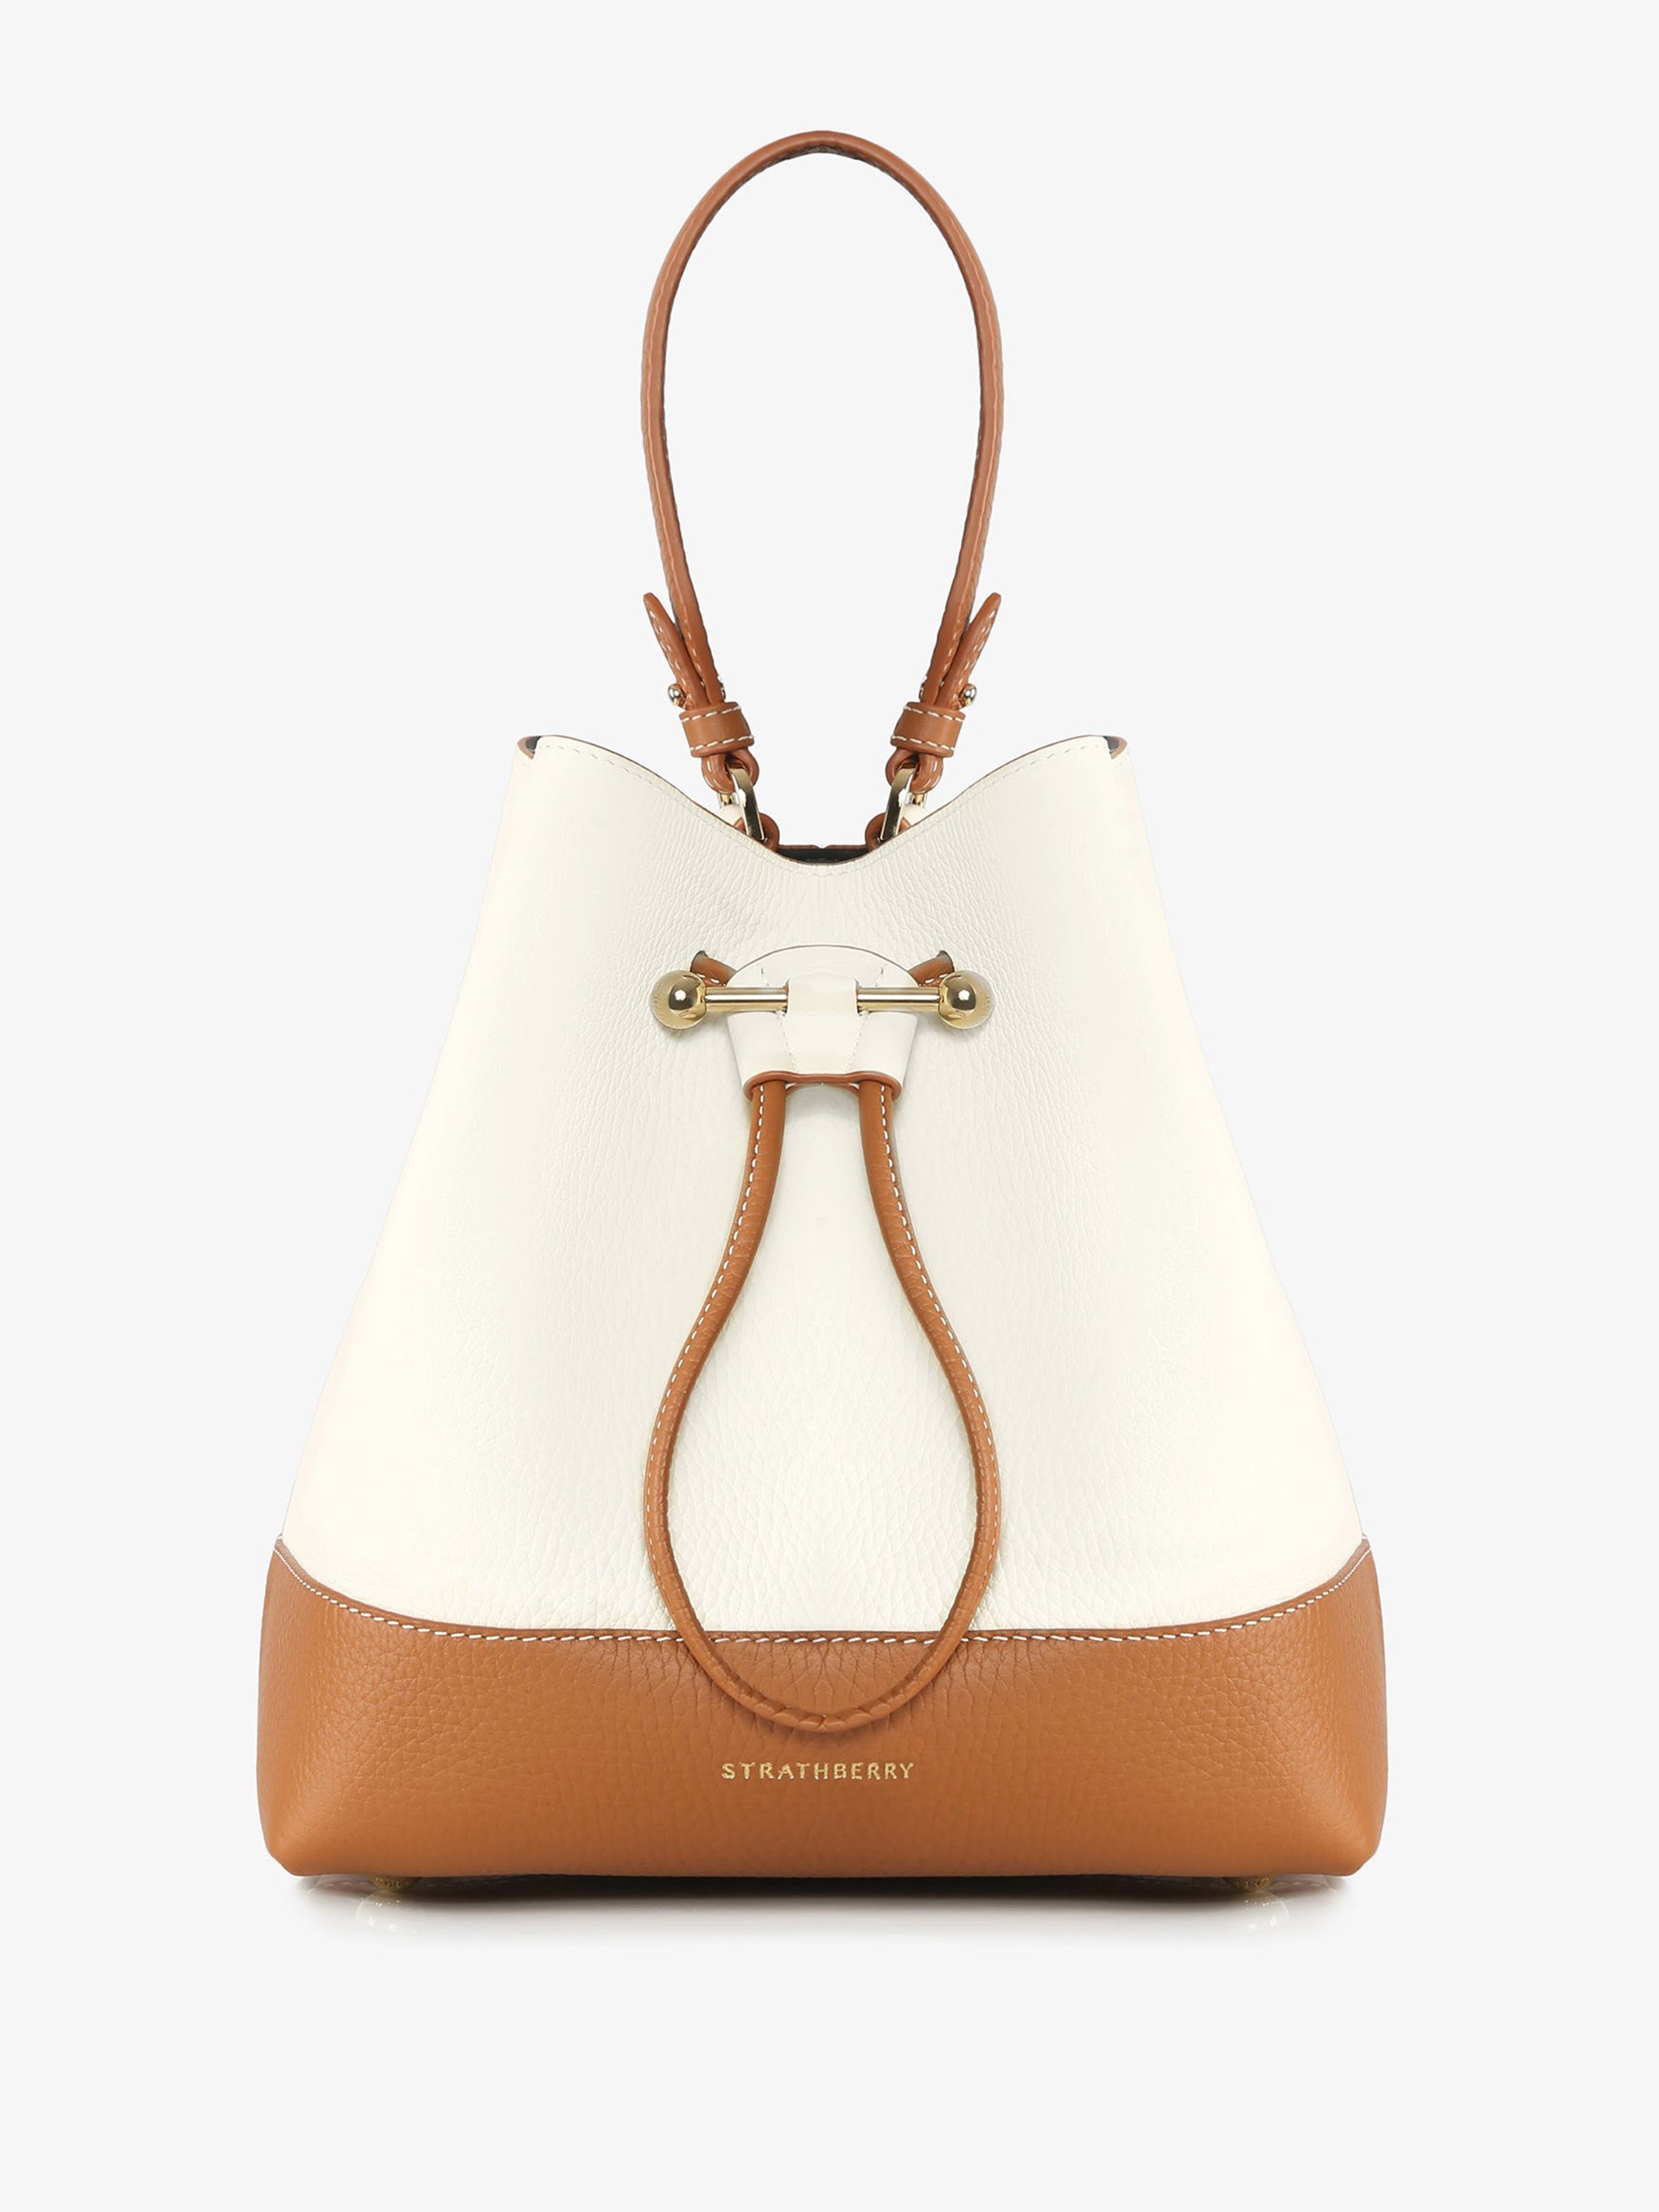 Lana Midi bucket bag in tan leather with white stitching - Collagerie